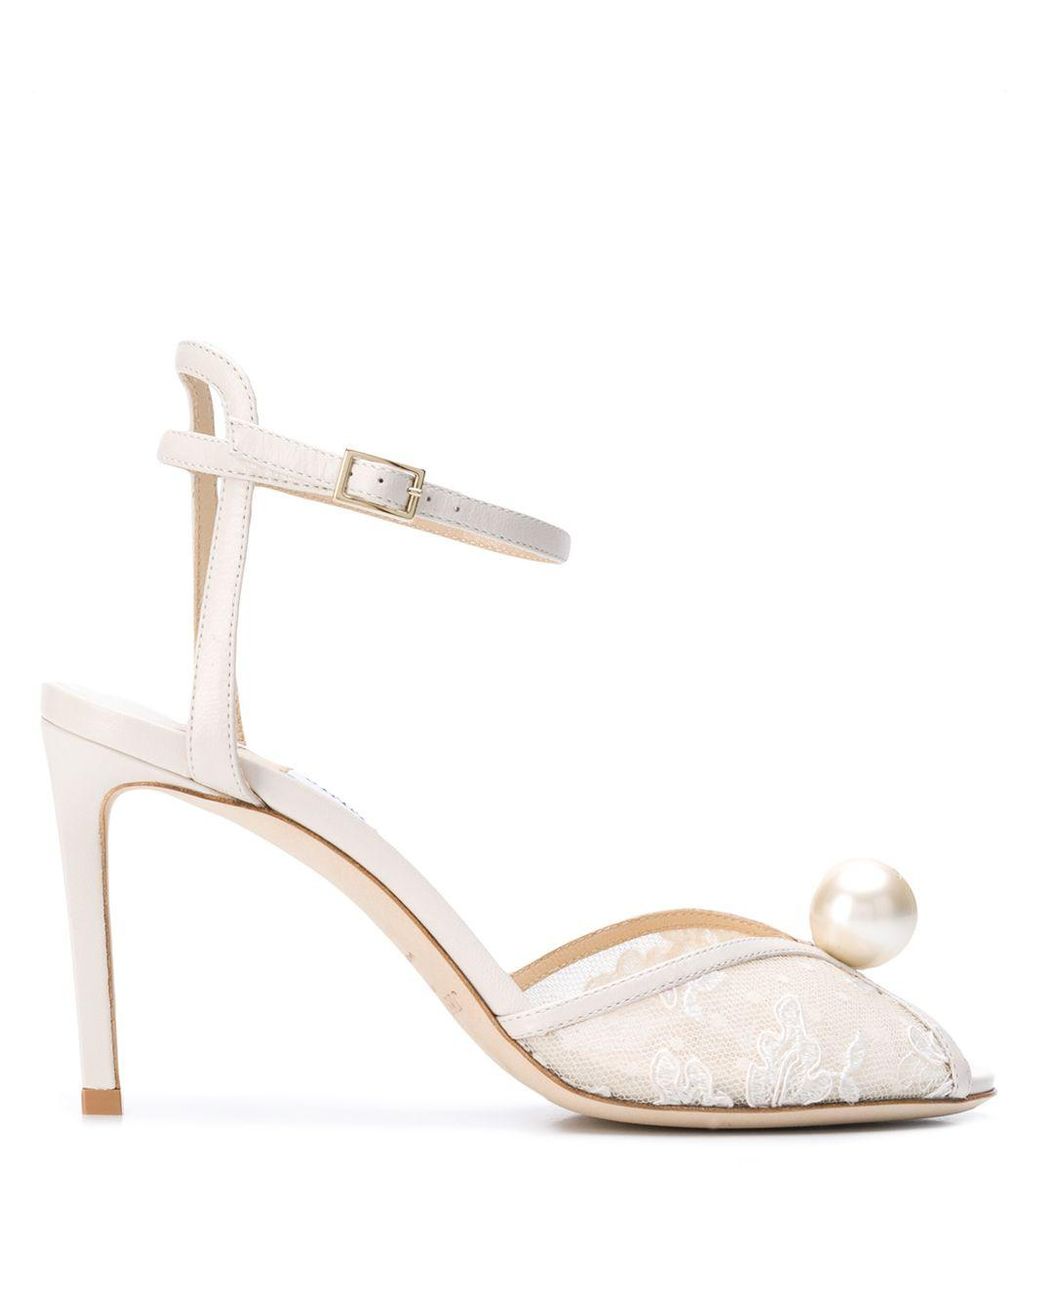 Jimmy Choo Sacora 85 Lace Leather Sandals - Lyst